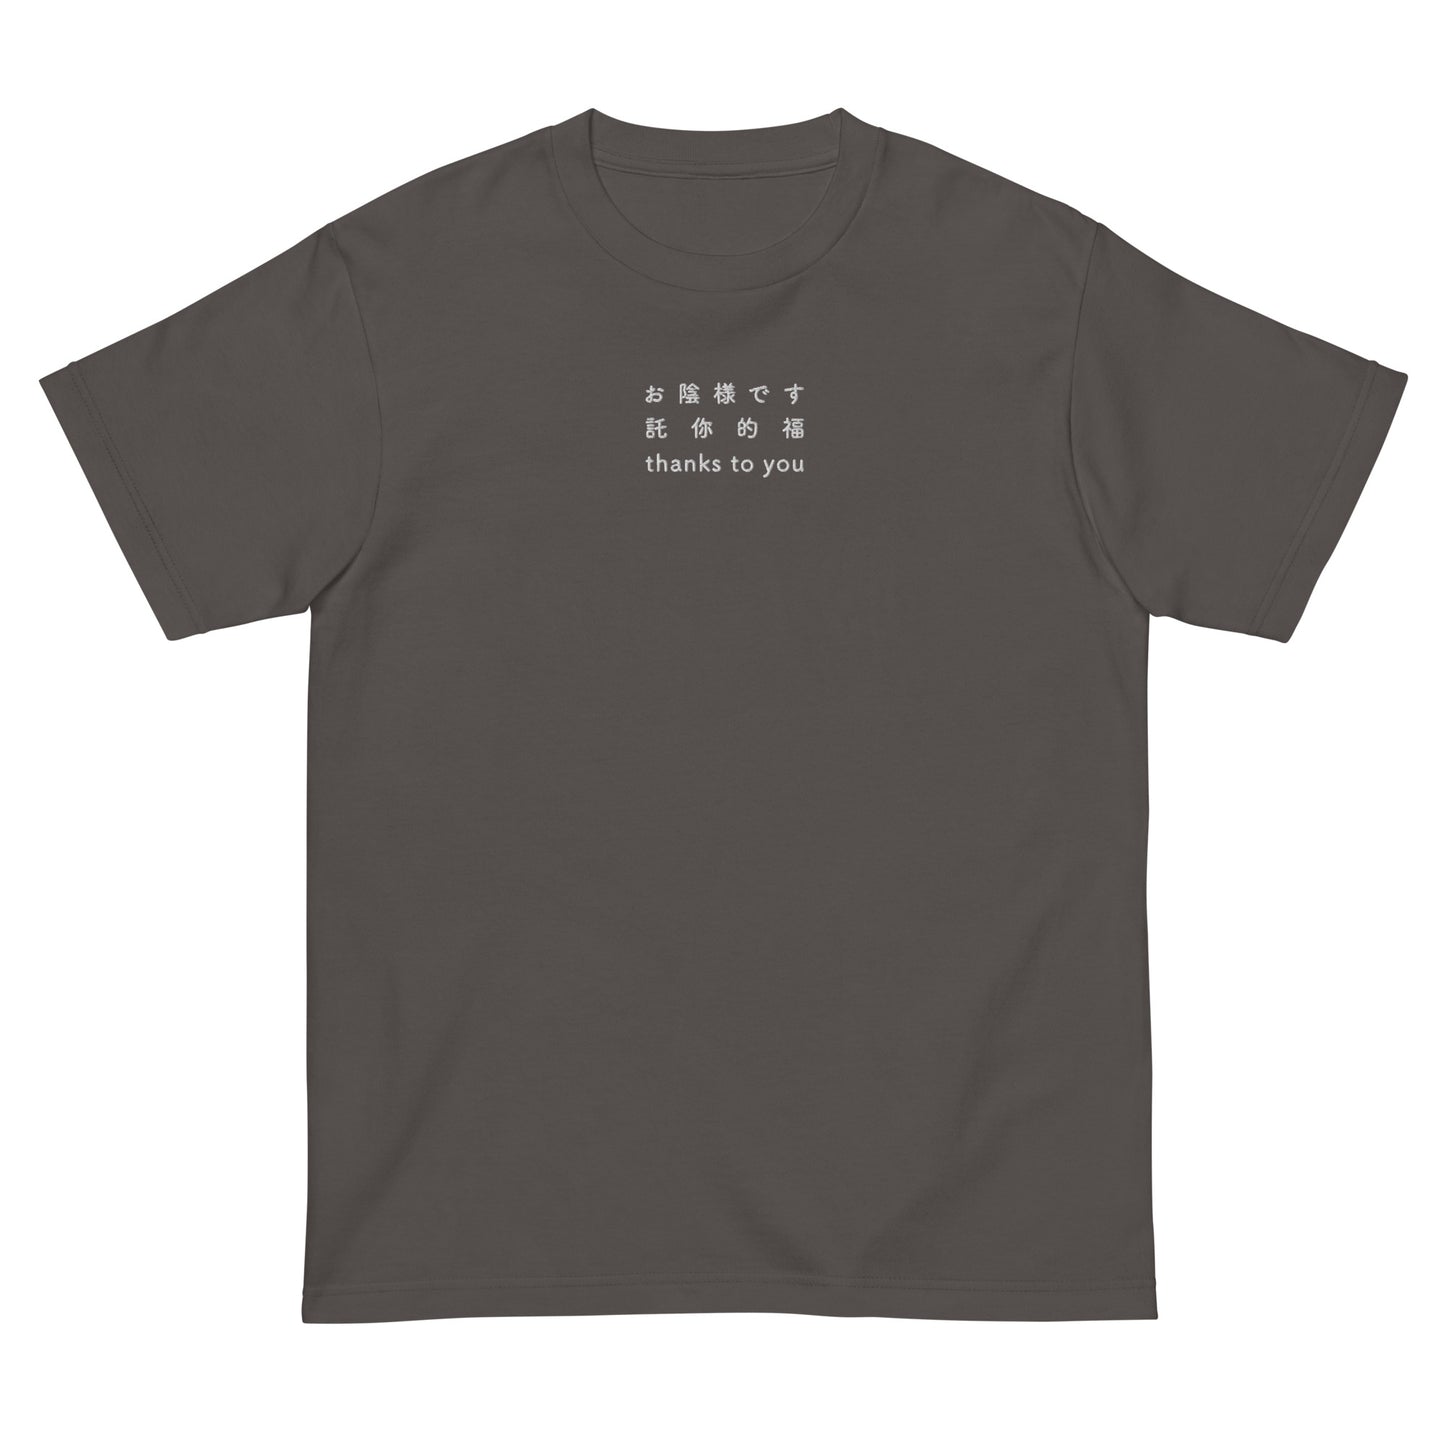 Charcoal Gray High Quality Tee - Front Design with an white Embroidery "thanks to you" in Japanese,Chinese and English